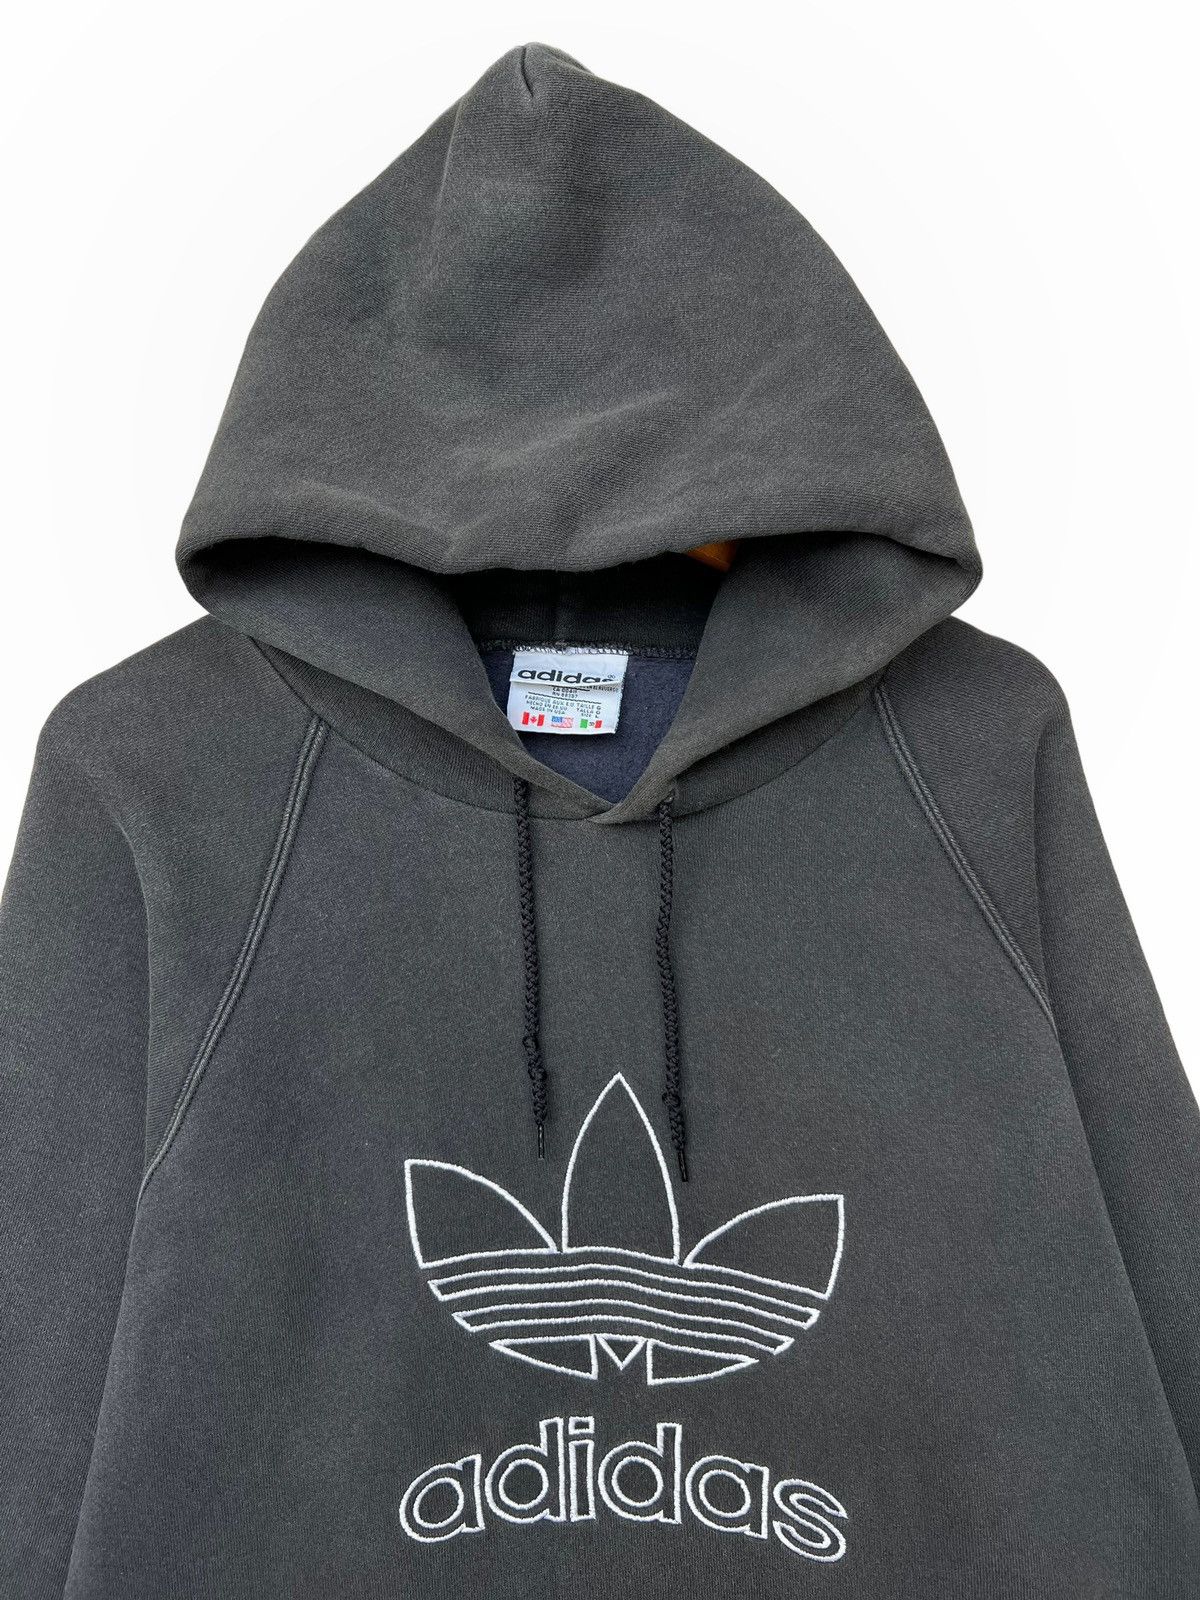 Vintage 90s Adidas Sunfaded Baggy Boxy Sunfaded Hoodie - 5